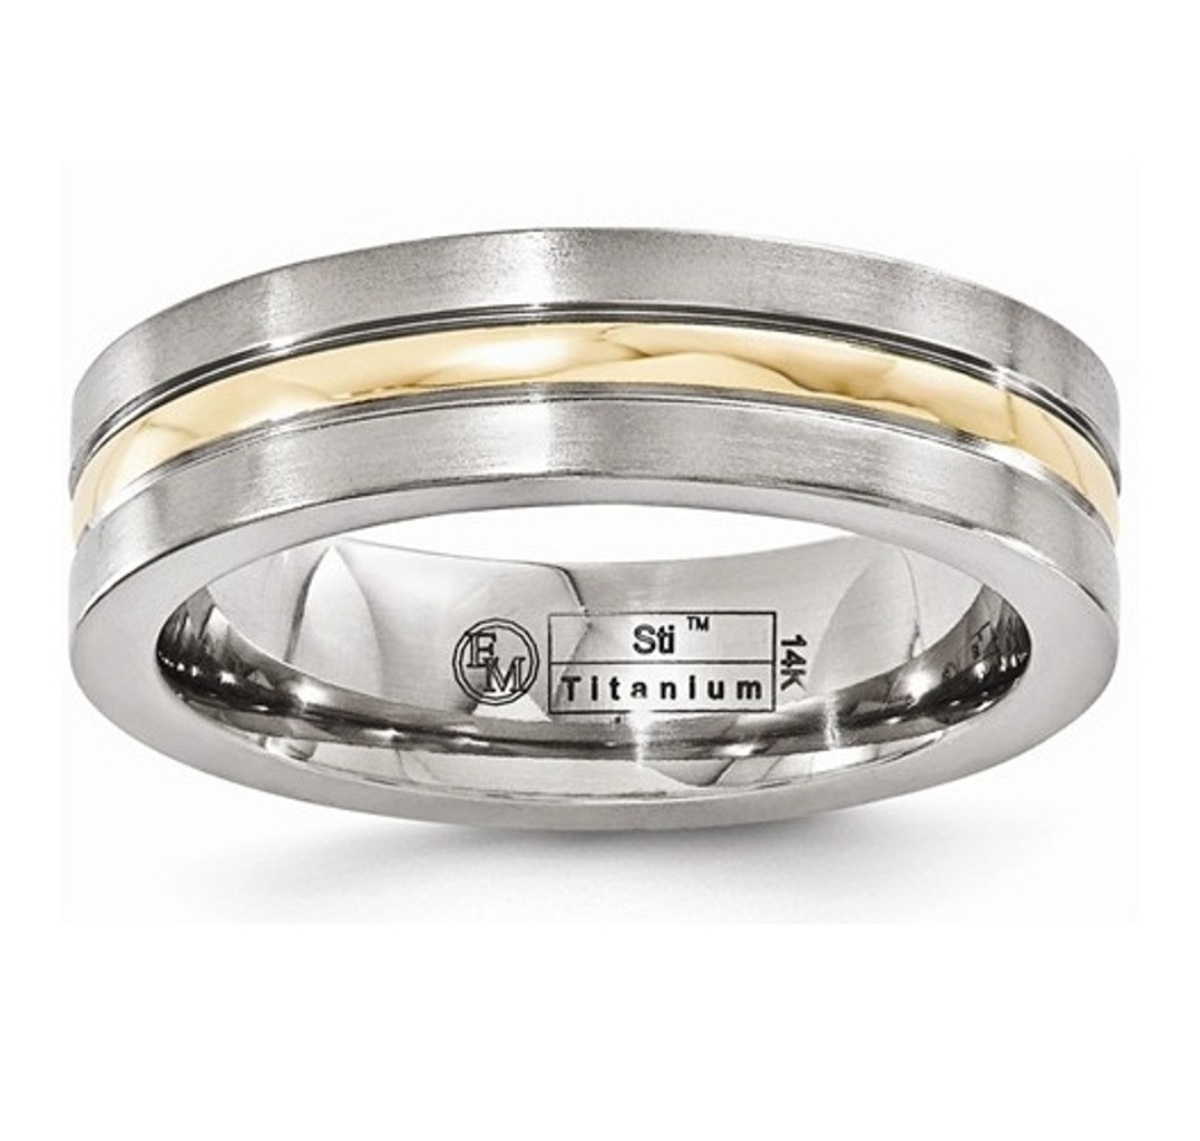  Titanium And 14K Brushed And Polished 6mm Band